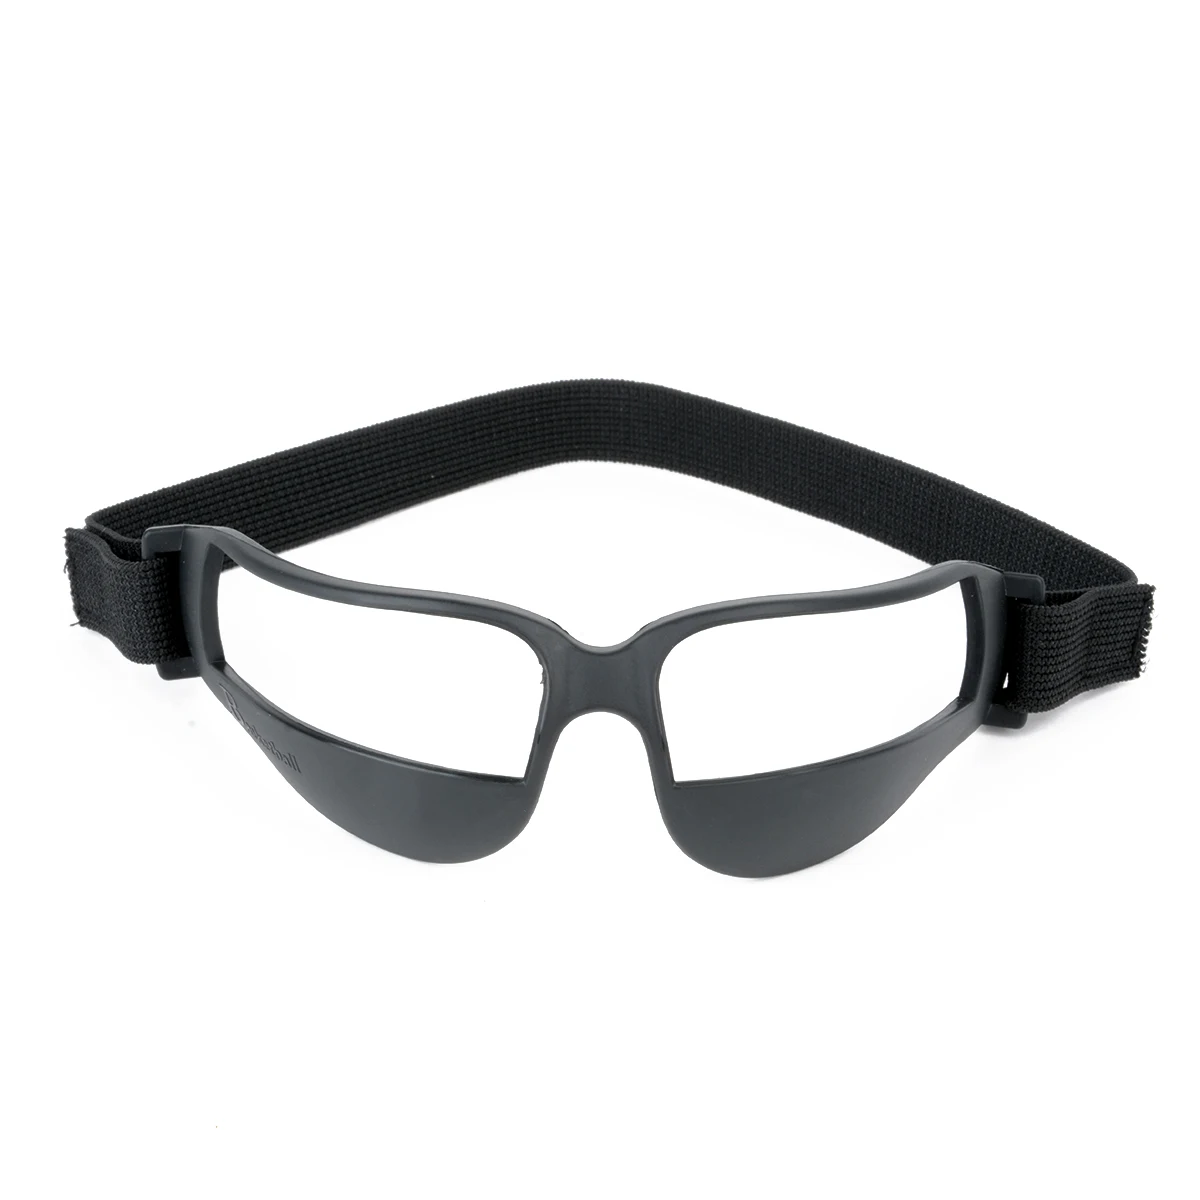 Heads Up Basketball Dribbling Dribble Specs Goggles Glasses Plastic TRAINING AID 